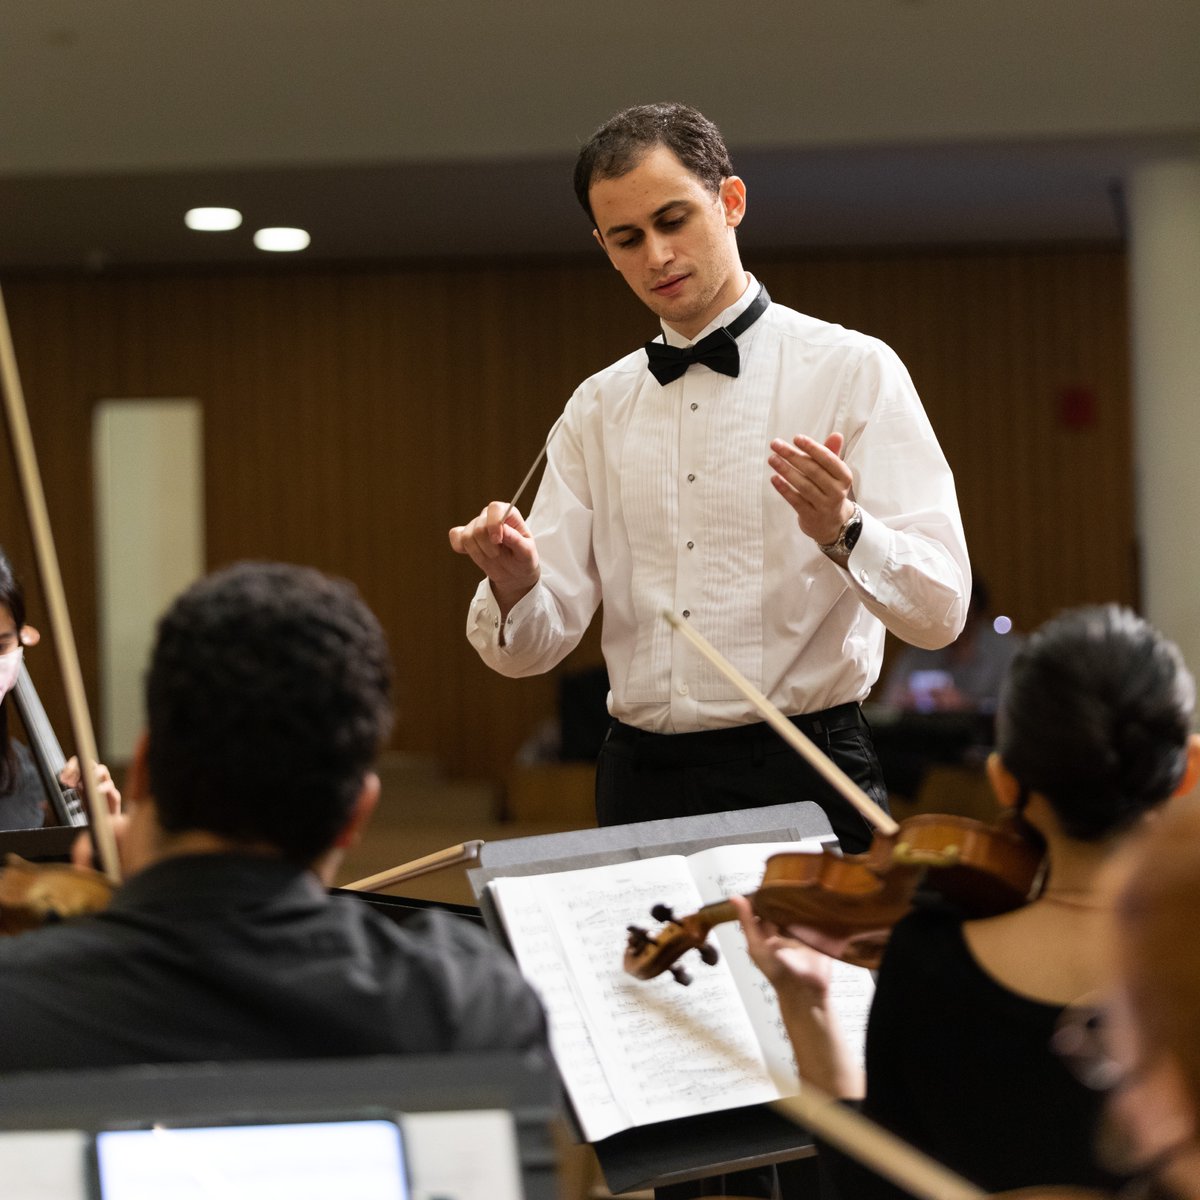 Conductor Elliot Roman will lead the musical ensemble underStaffed on Thursday, performing pieces by Schulhoff, Berg, Zelenka, Bach. Join us for a fine evening. #guaranteed Tickets: bit.ly/49pmFwR #classicalmusic #nyc #culture #ues #nightout